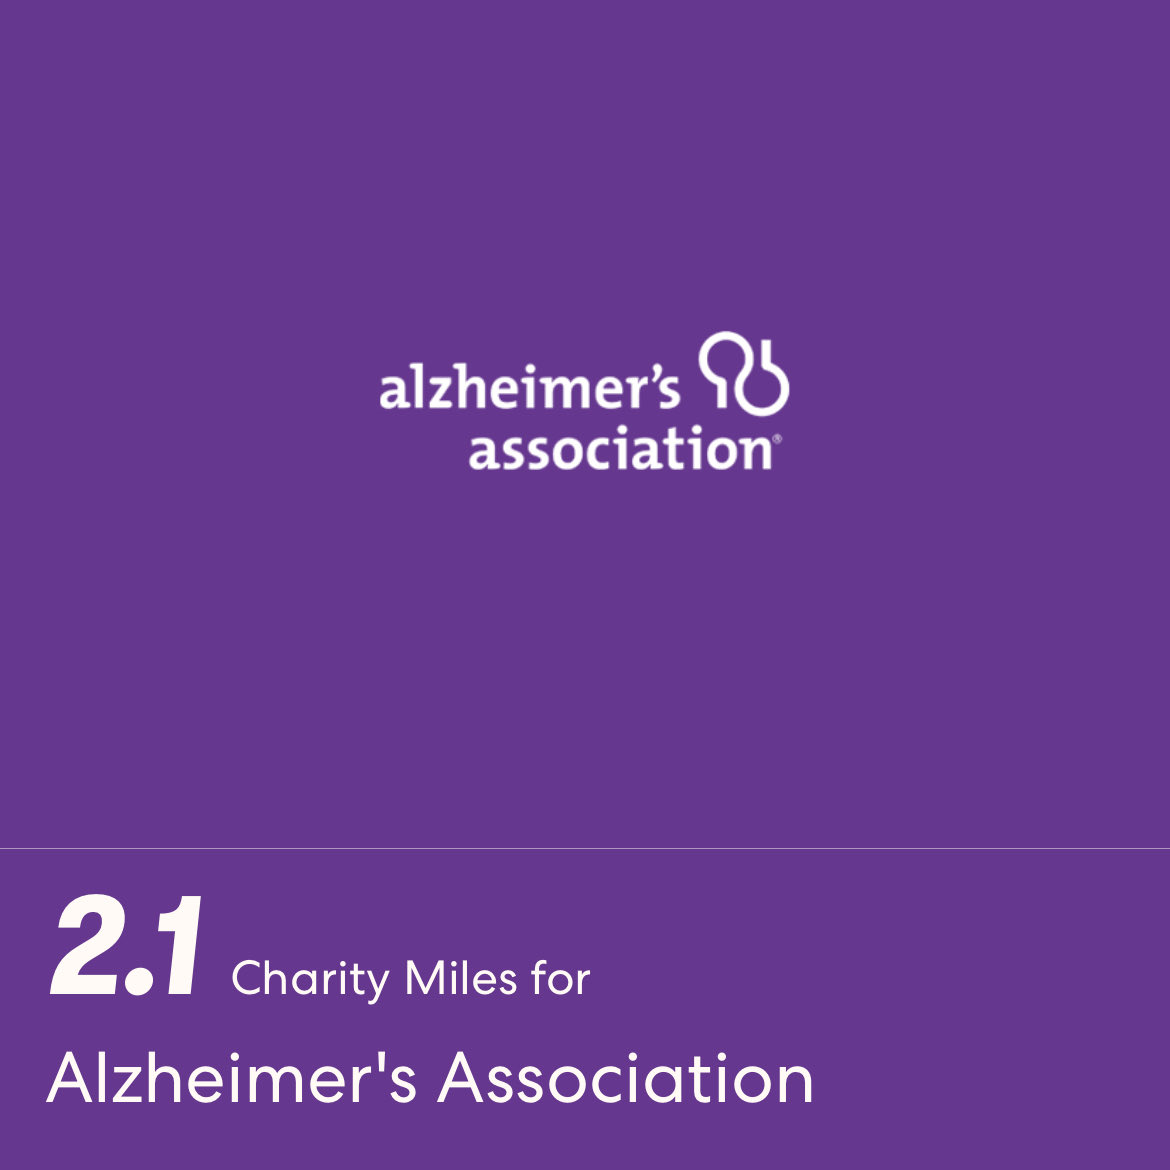 2.1 Charity Miles for Alzheimer's Association. I’d be grateful for your support. If you’re in a position to do so, please click here to sponsor me. miles.app.link/e/xyrYBy0U3tb